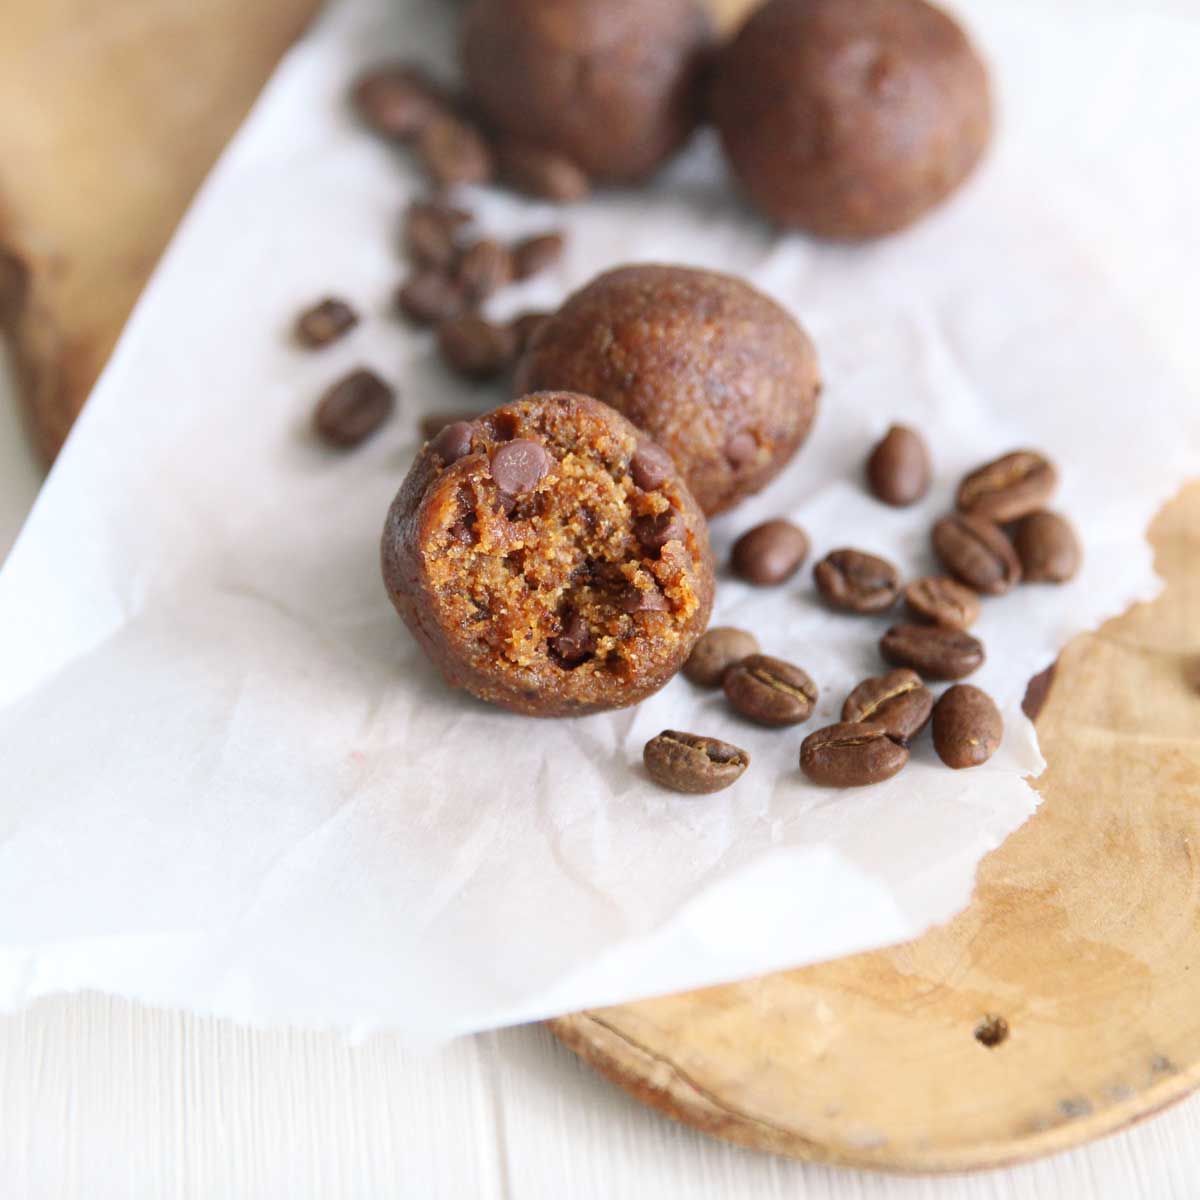 Spicy Honey Ginger Protein Balls (Easy Healthy and No-Bake) - protein balls